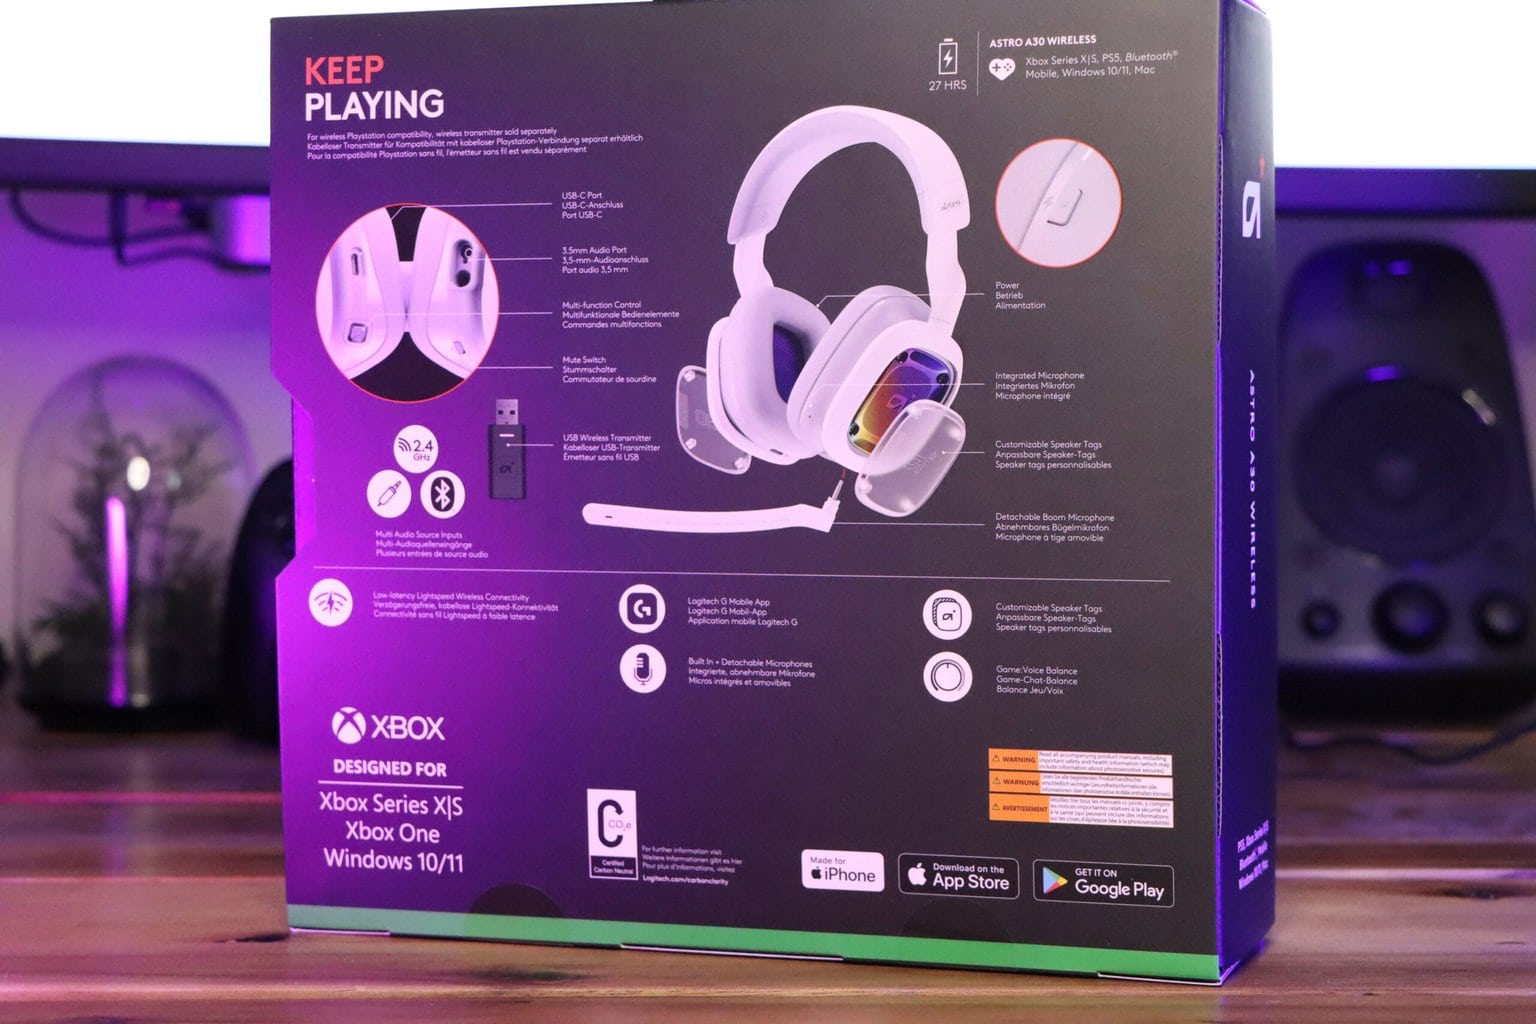 ASTRO Gaming A30 Audio System análisis